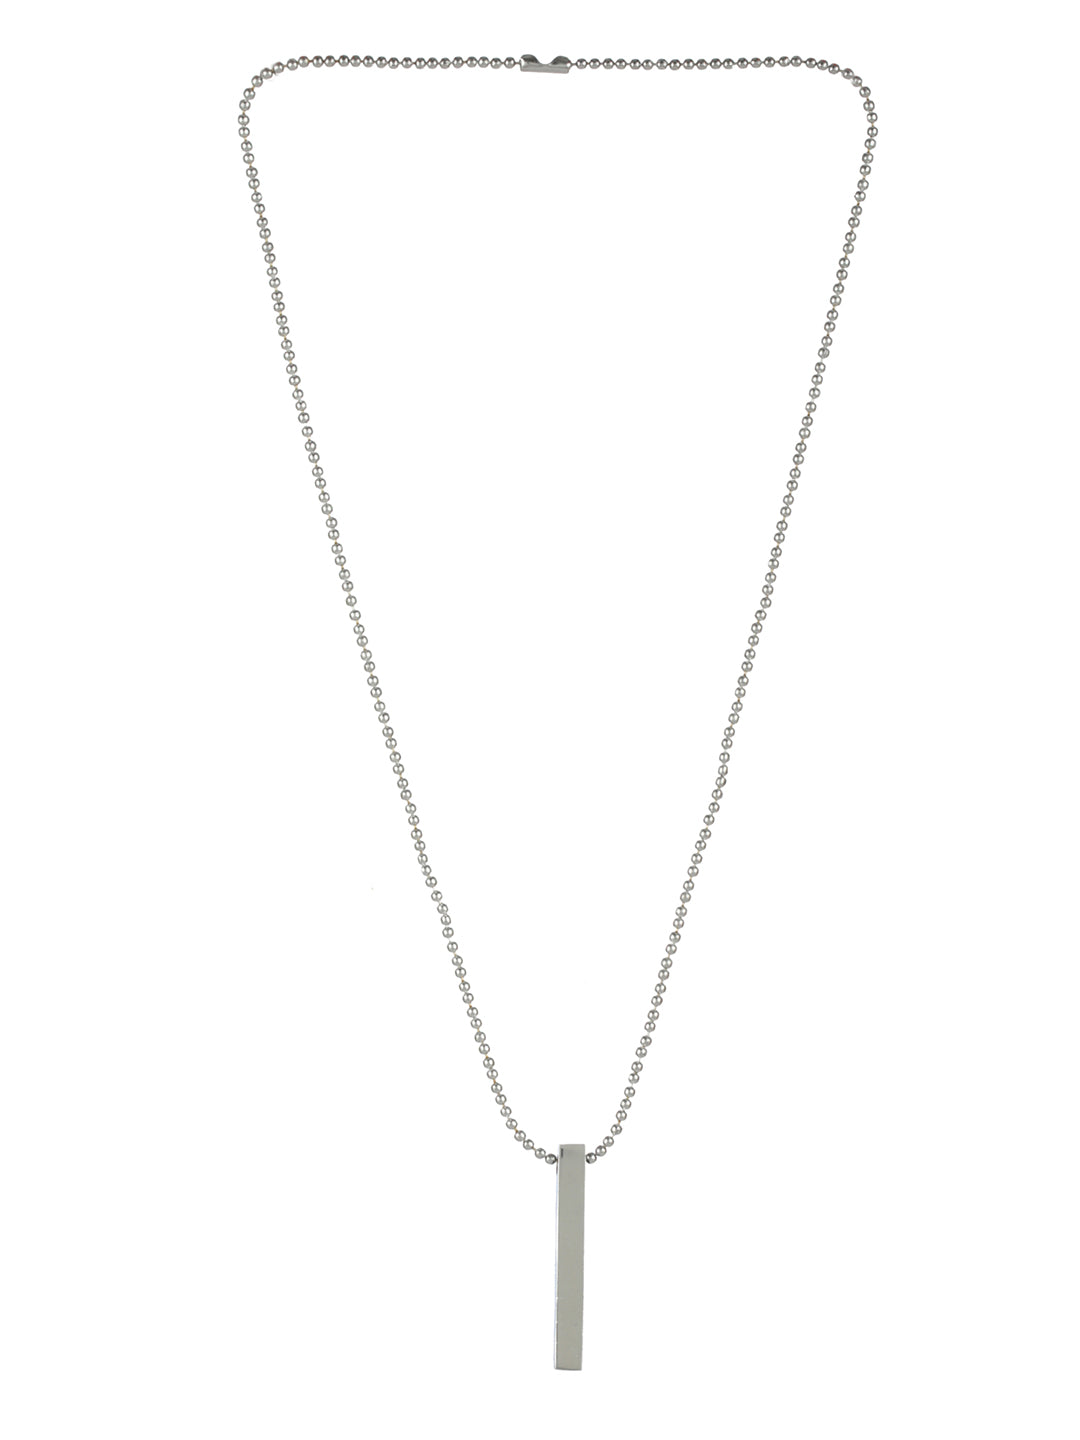 Sterling Silver Custom Initials Necklace (Silver)